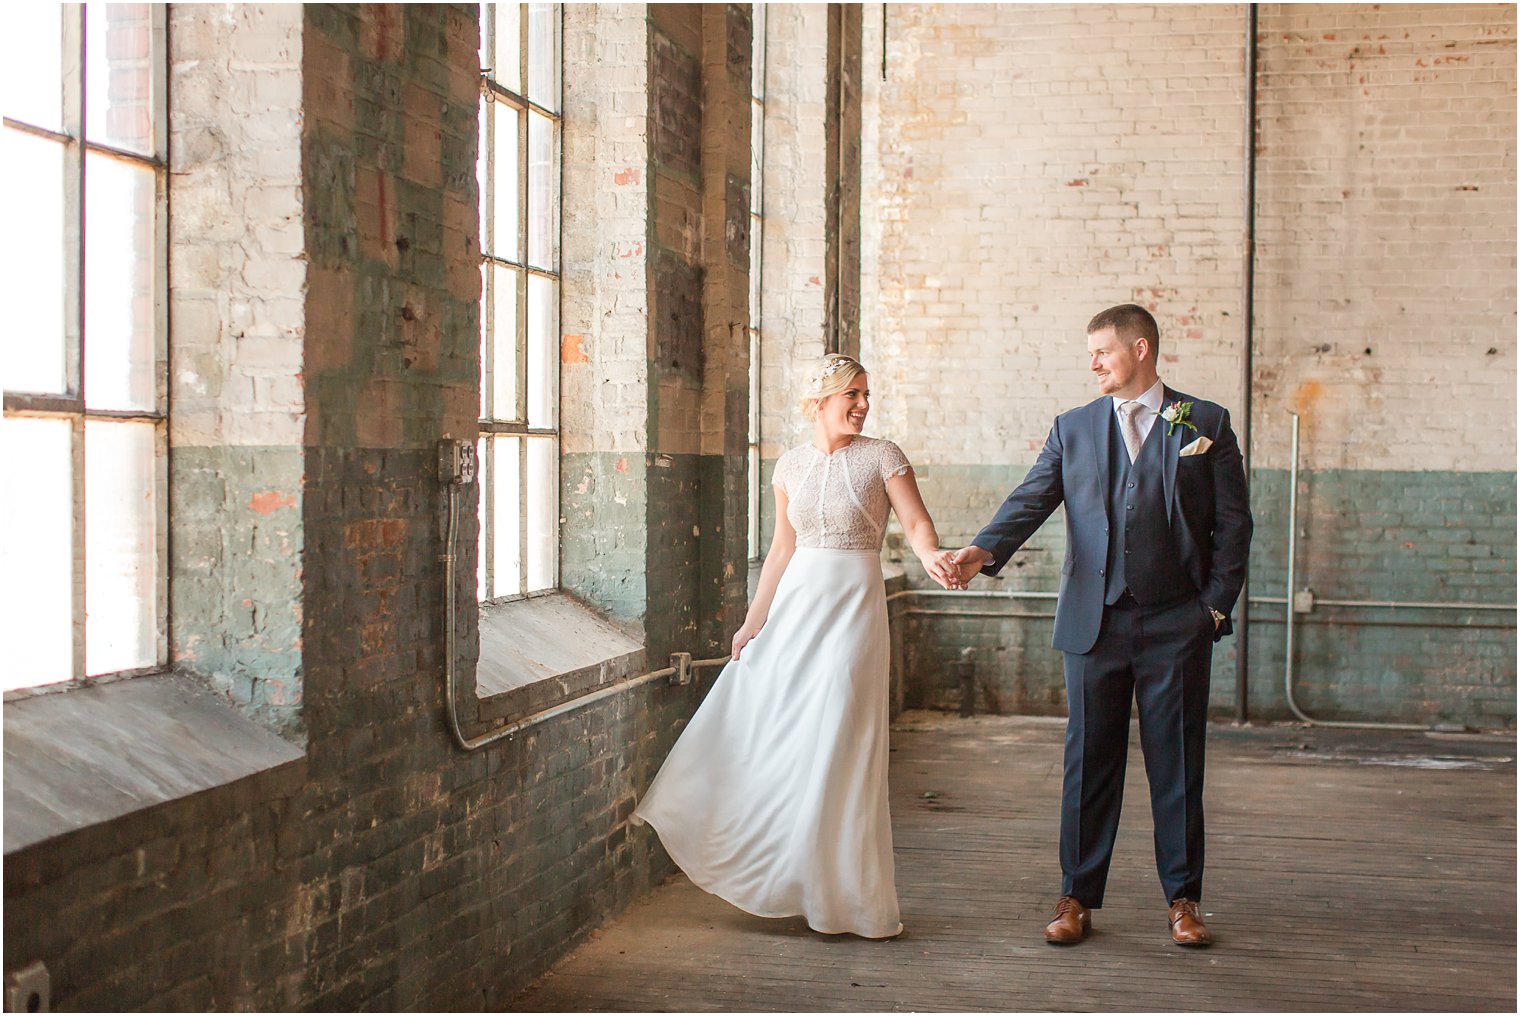 Couple modeling at former silk factory